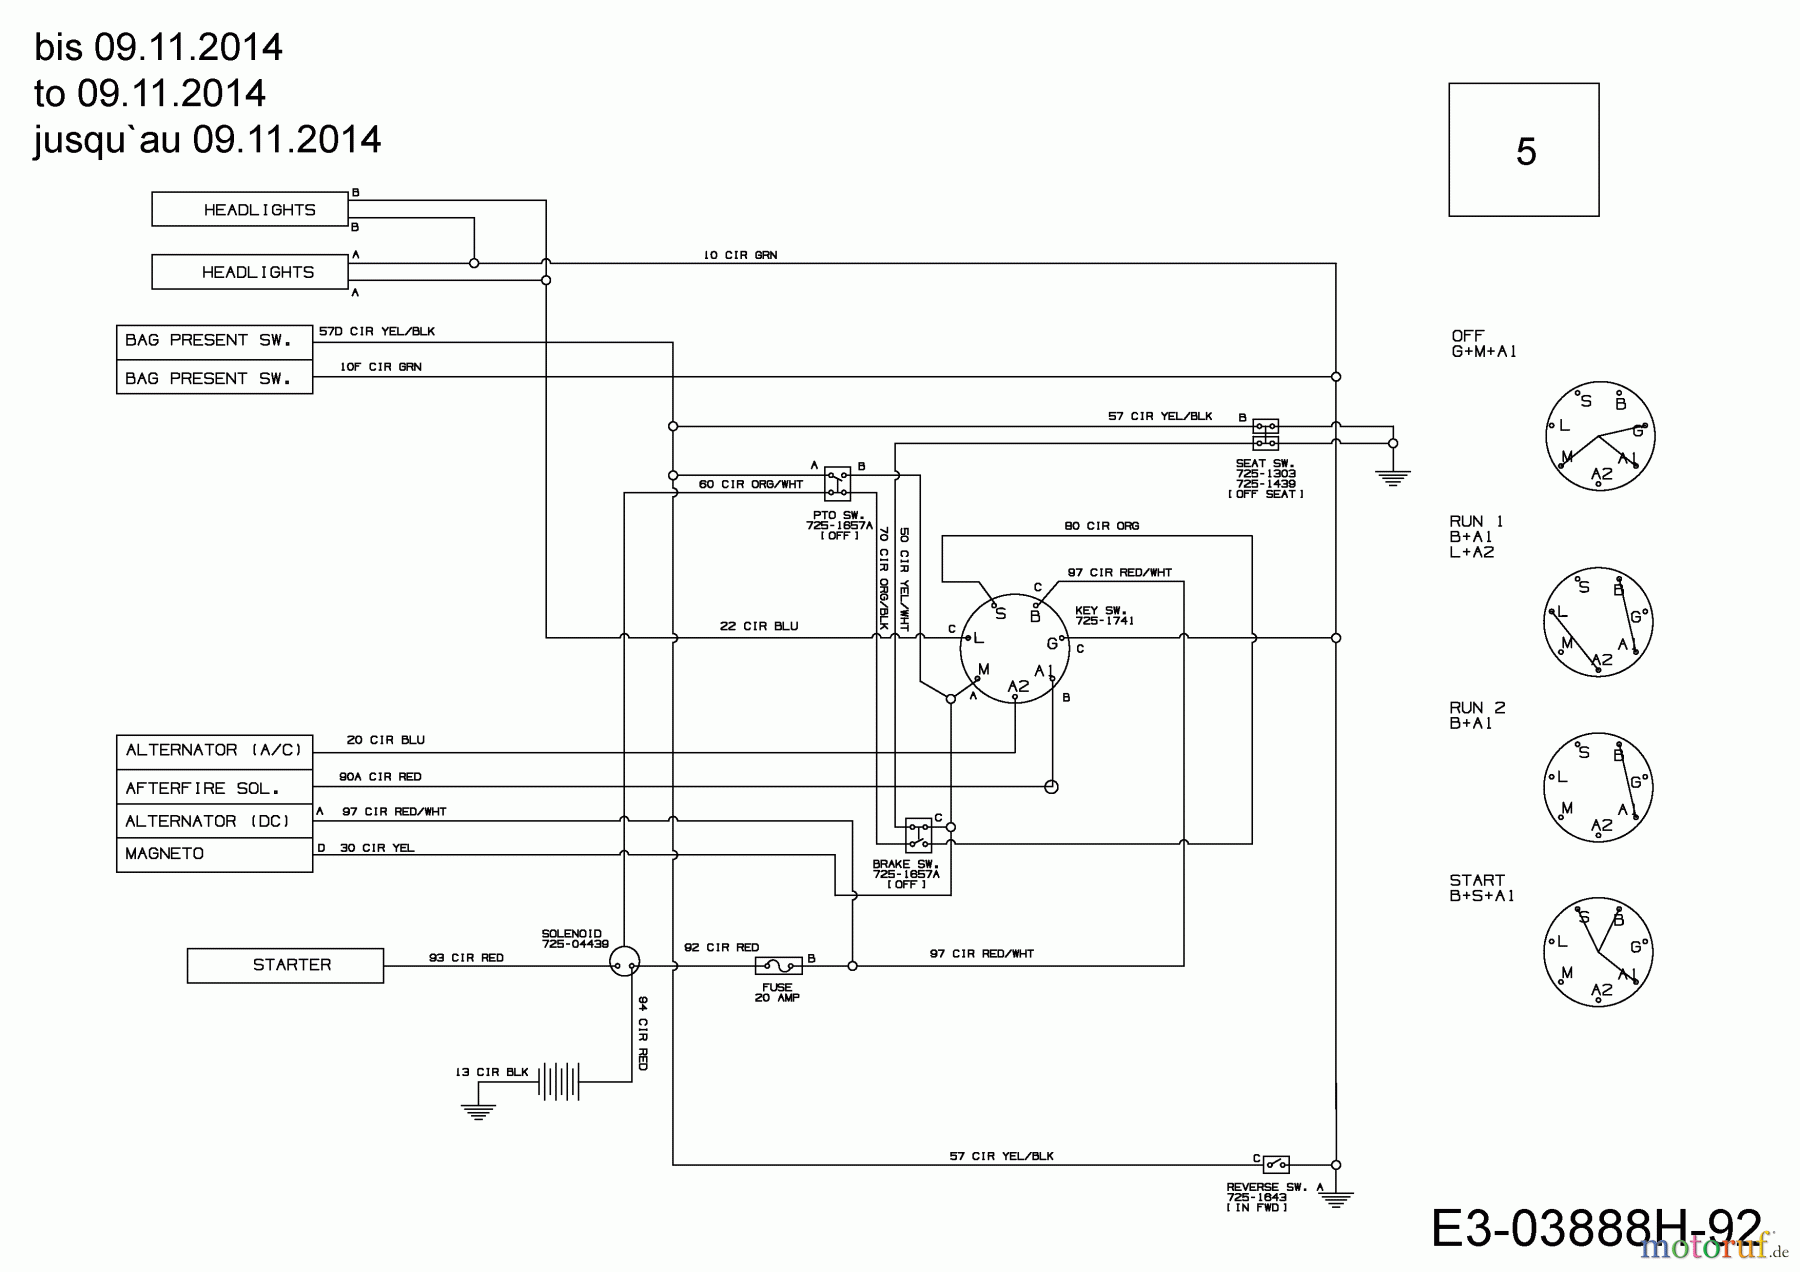  MTD Lawn tractors Smart RE 115 13HH765E676  (2015) Wiring diagram to 09.11.2014